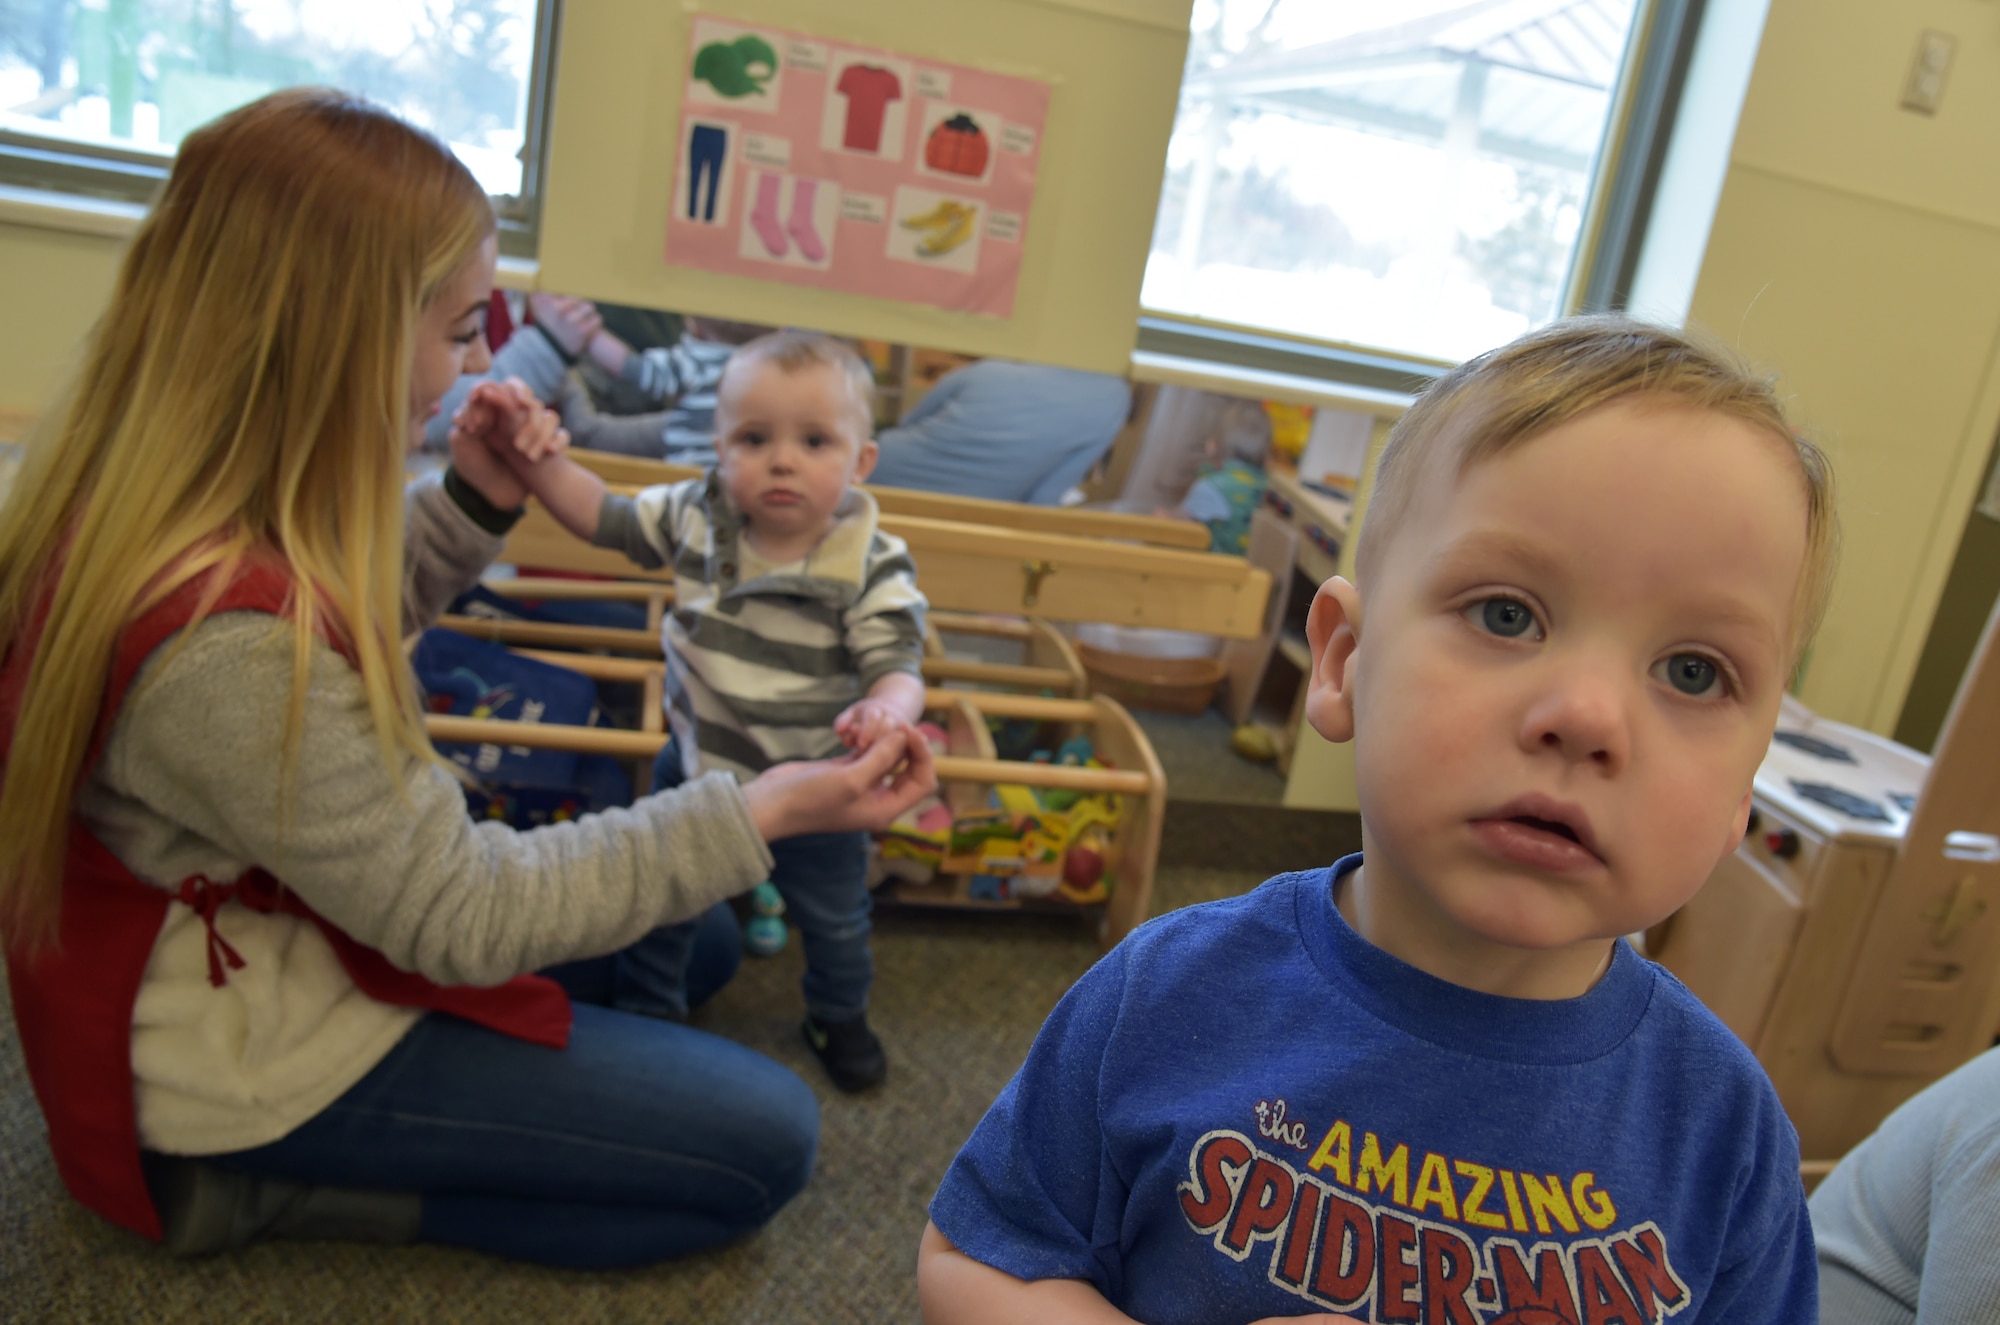 A toddler poses for a photo at the Child Development Center on Grand Forks Air Force Base, N.D., March 10, 2020. Effective 1 April, the CDC will change its hours to open at 0700 and will close at 1730. The change is necessary to allow for mandated scheduled breaks for caregivers, curriculum planning and establishes continuity of caregivers in the classrooms. (U.S. Air Force photo by Tech. Sgt. Kamaile Casillas)